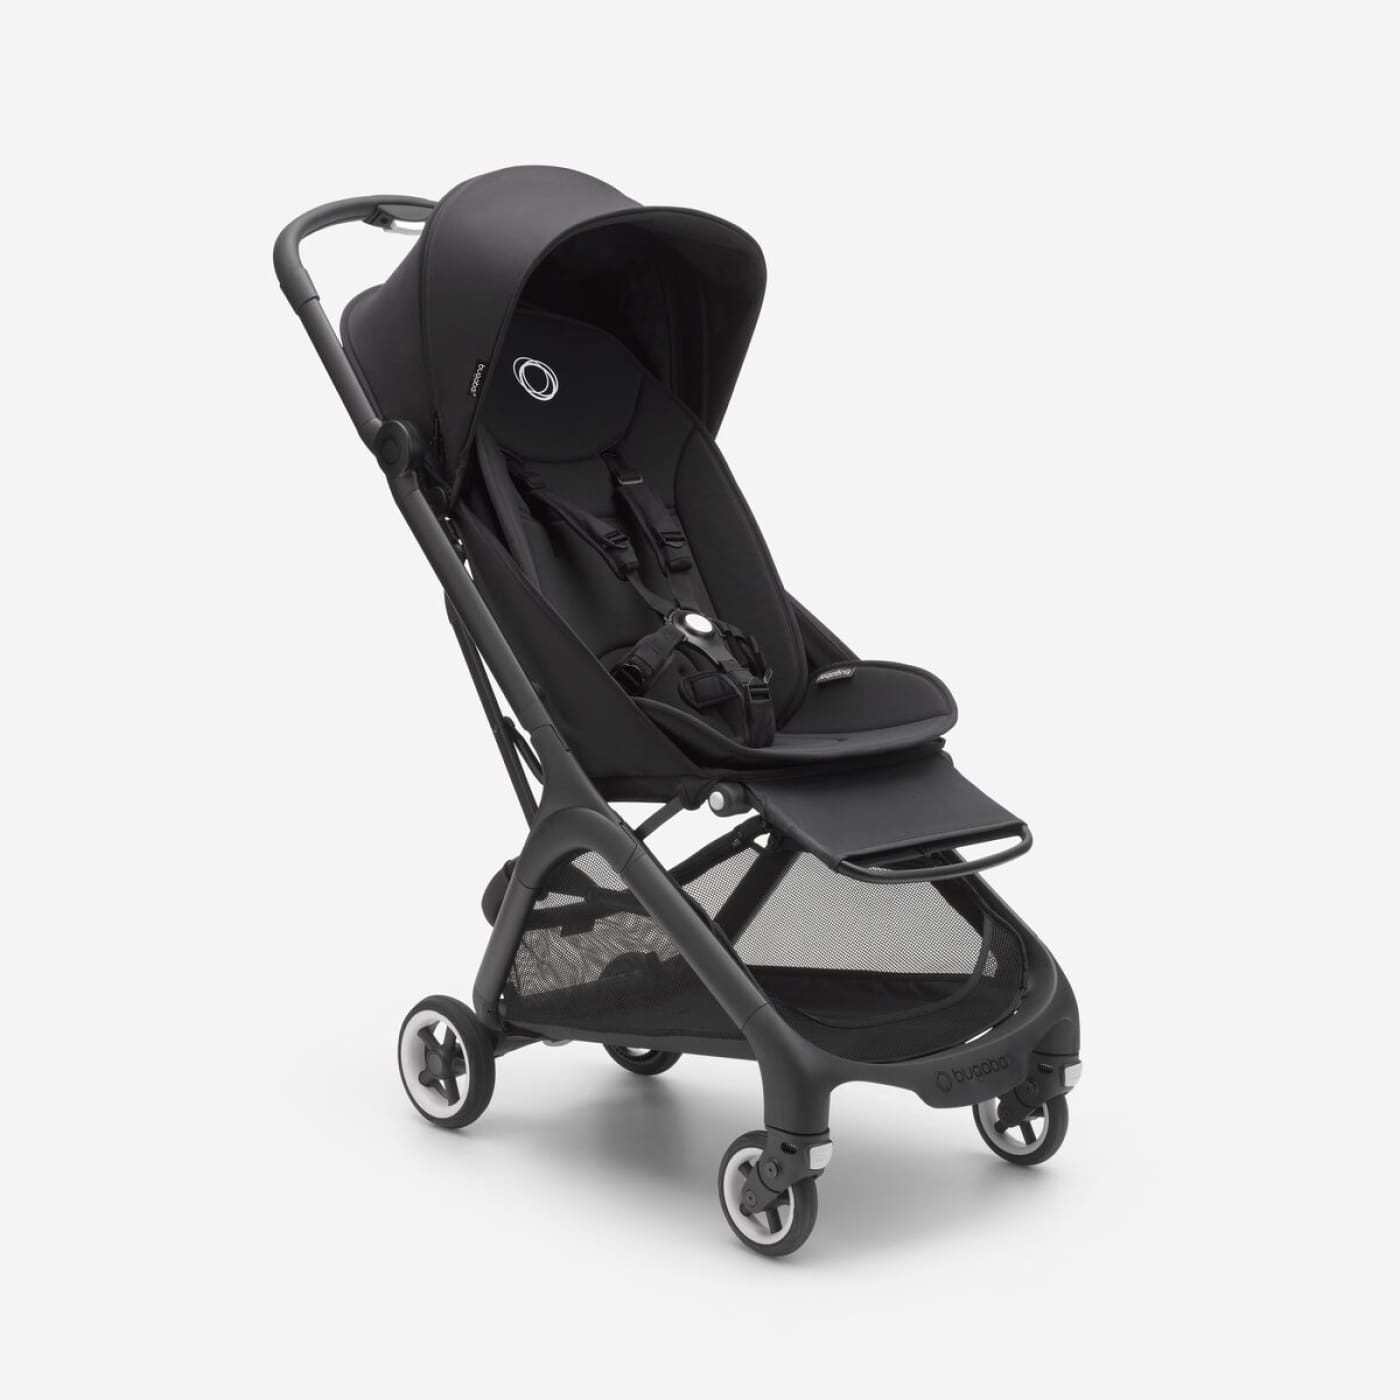 Bugaboo Butterfly Complete - PRAMS & STROLLERS - COMPACT/TRAVEL